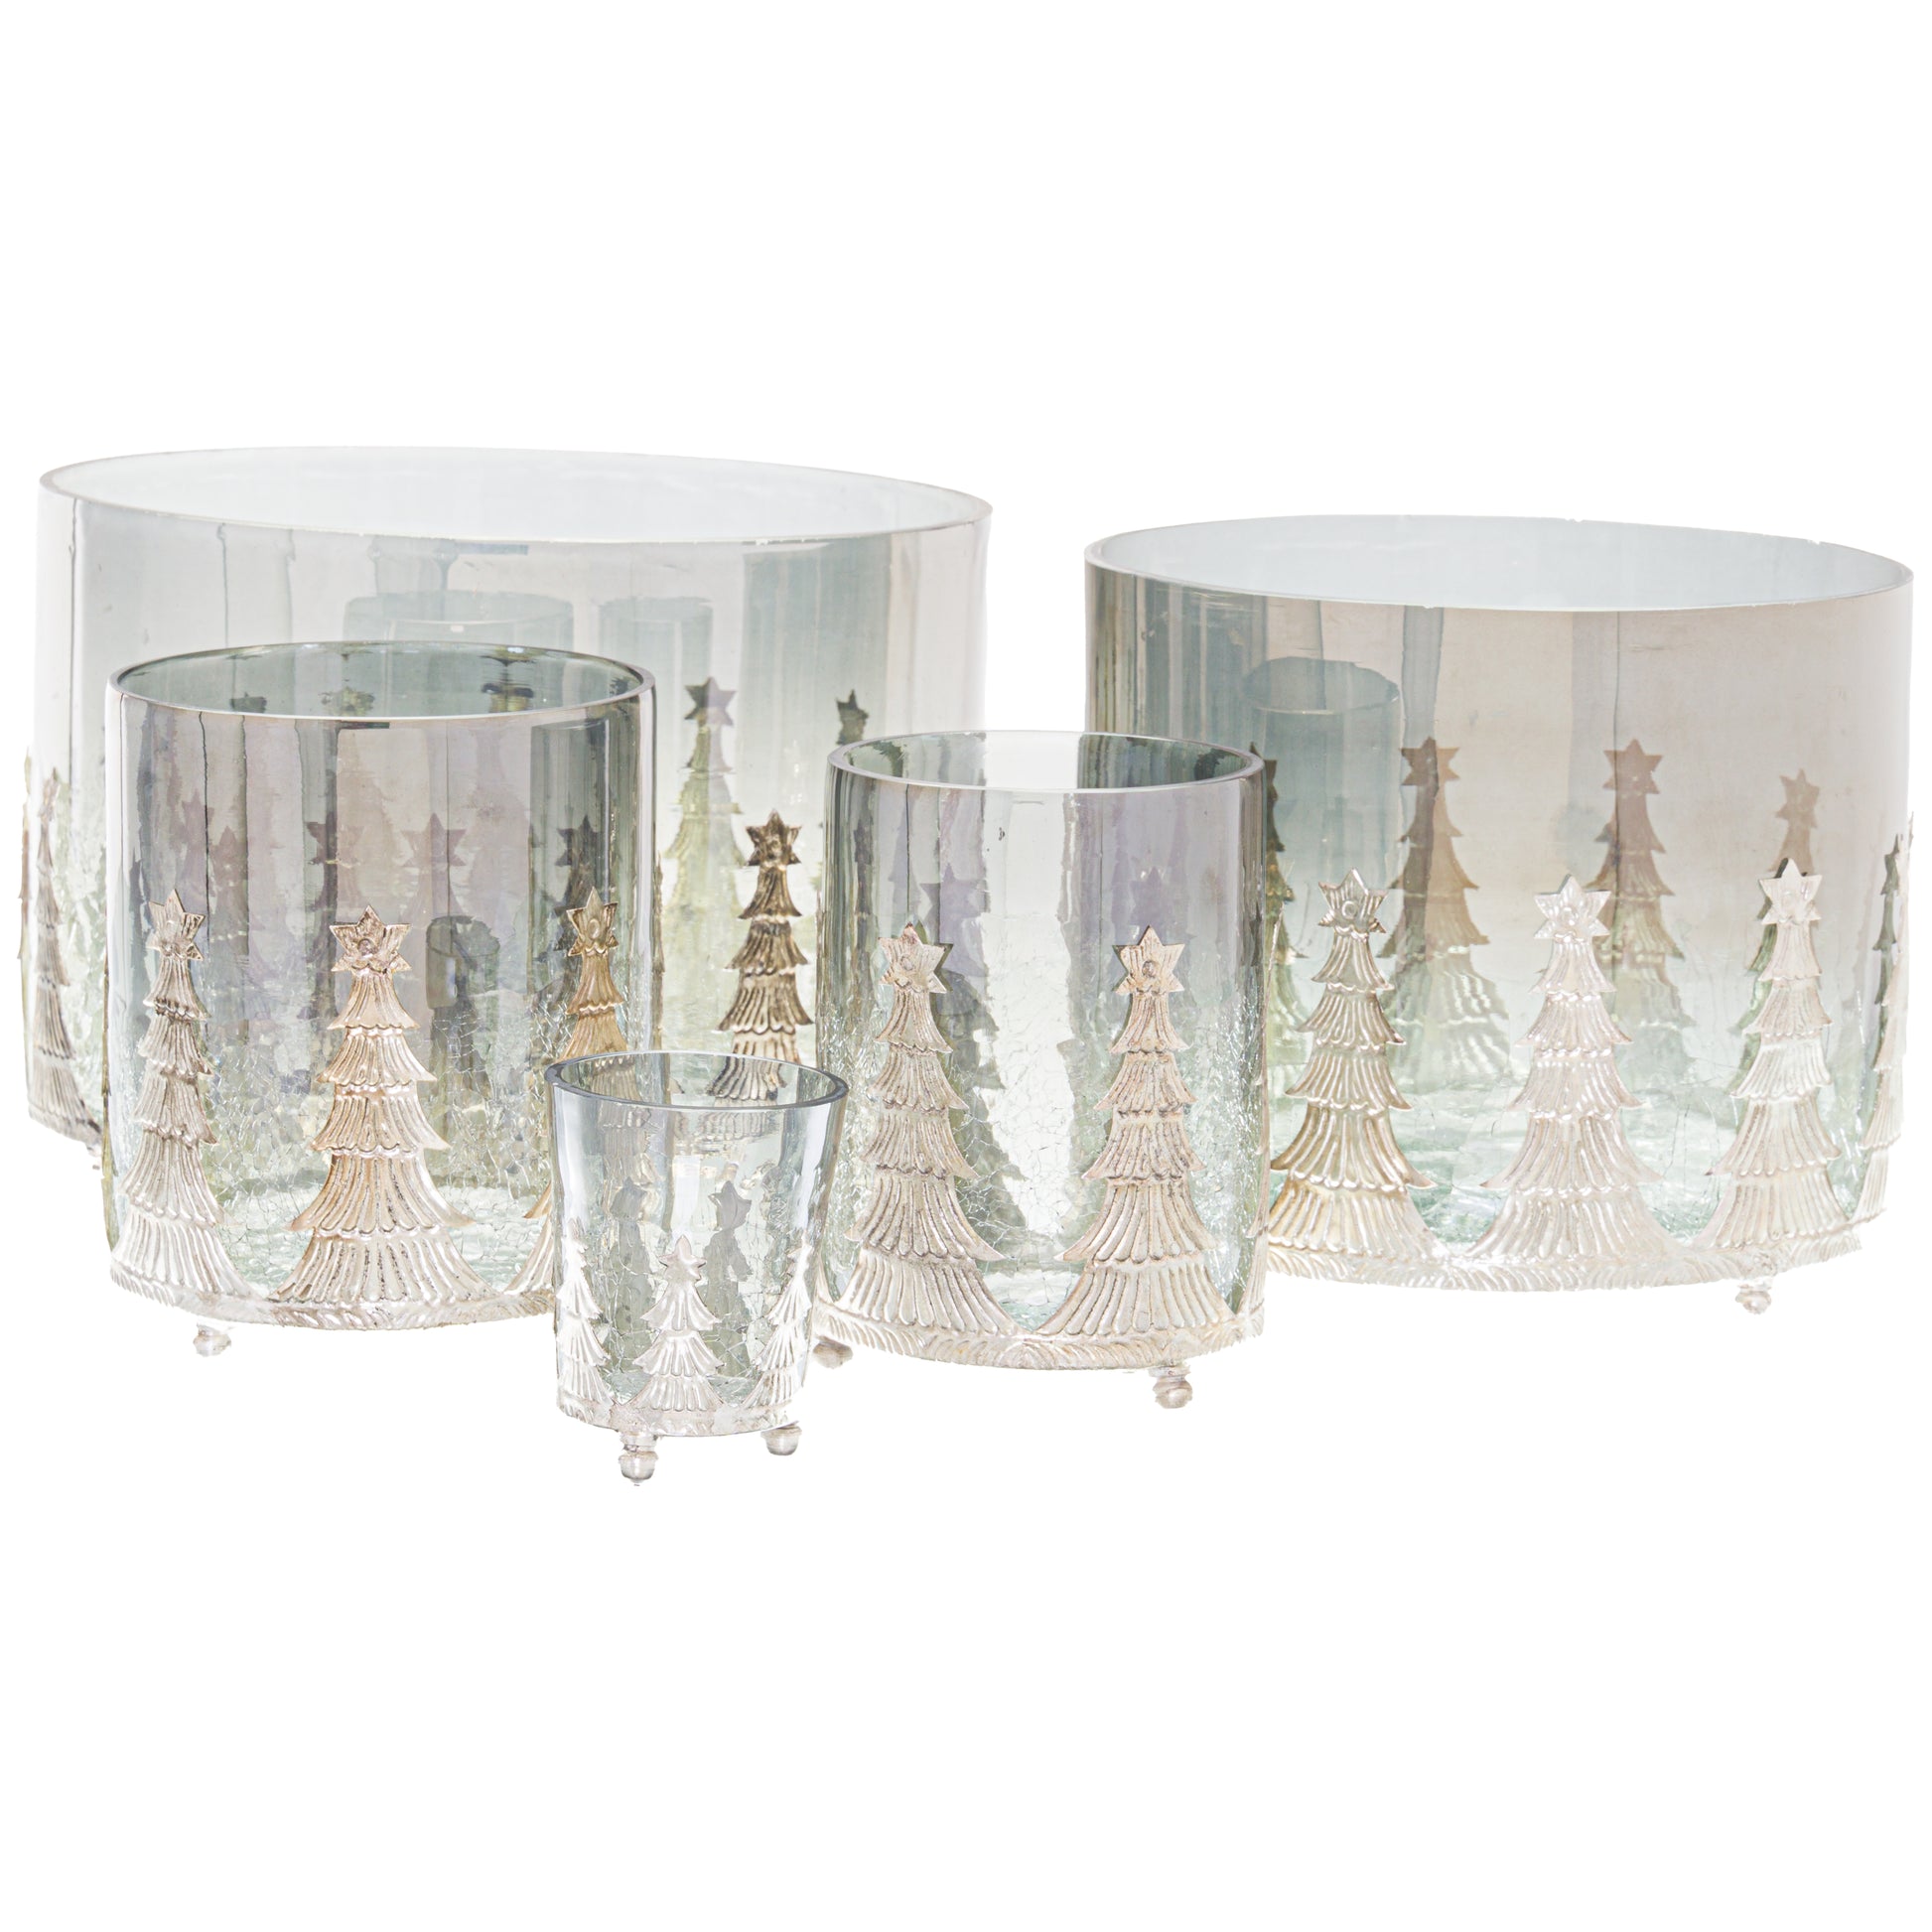 Noel Collection Medium Christmas Tree Crackled Candle Holder